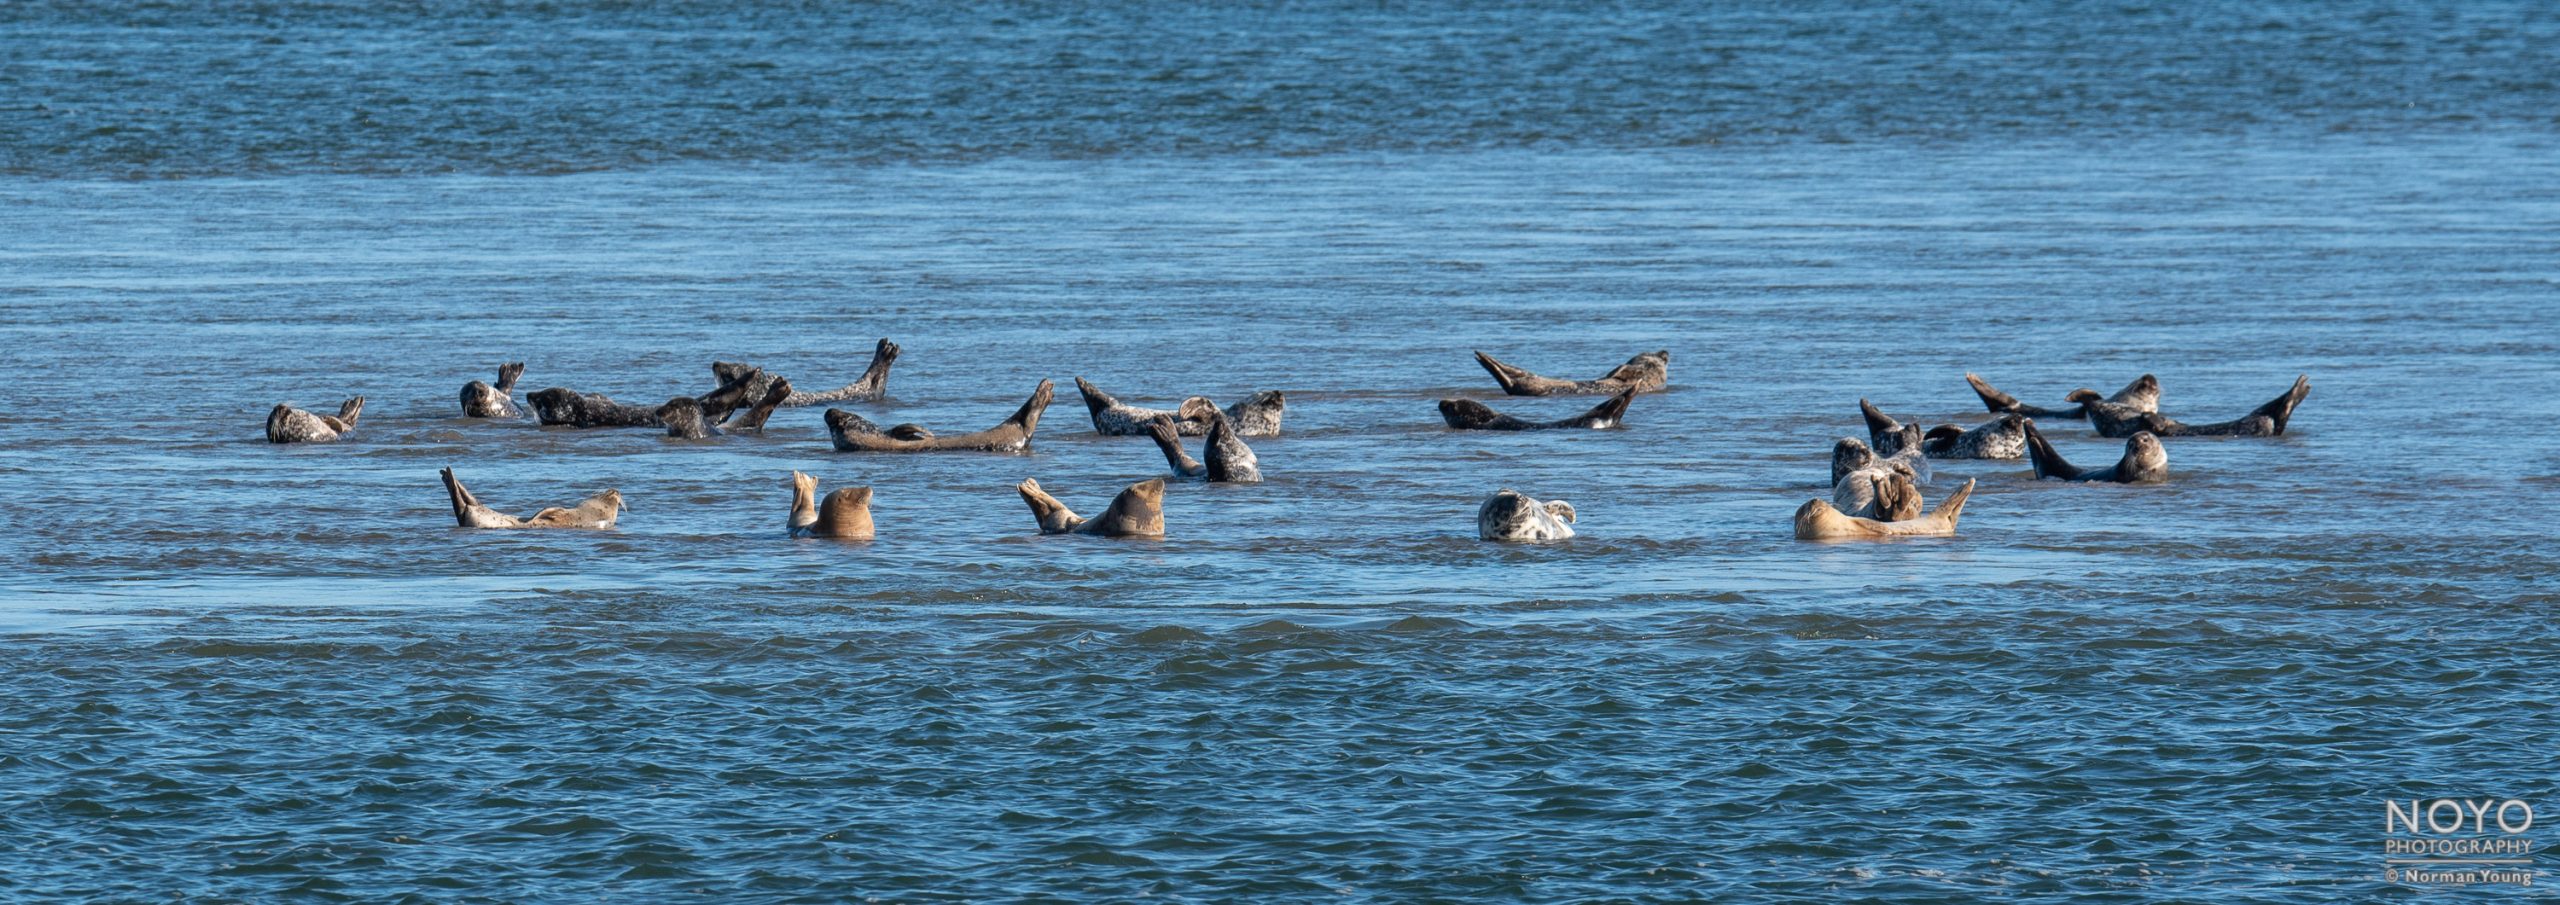 Photograph of seals at Loch Fleet by Norman Young